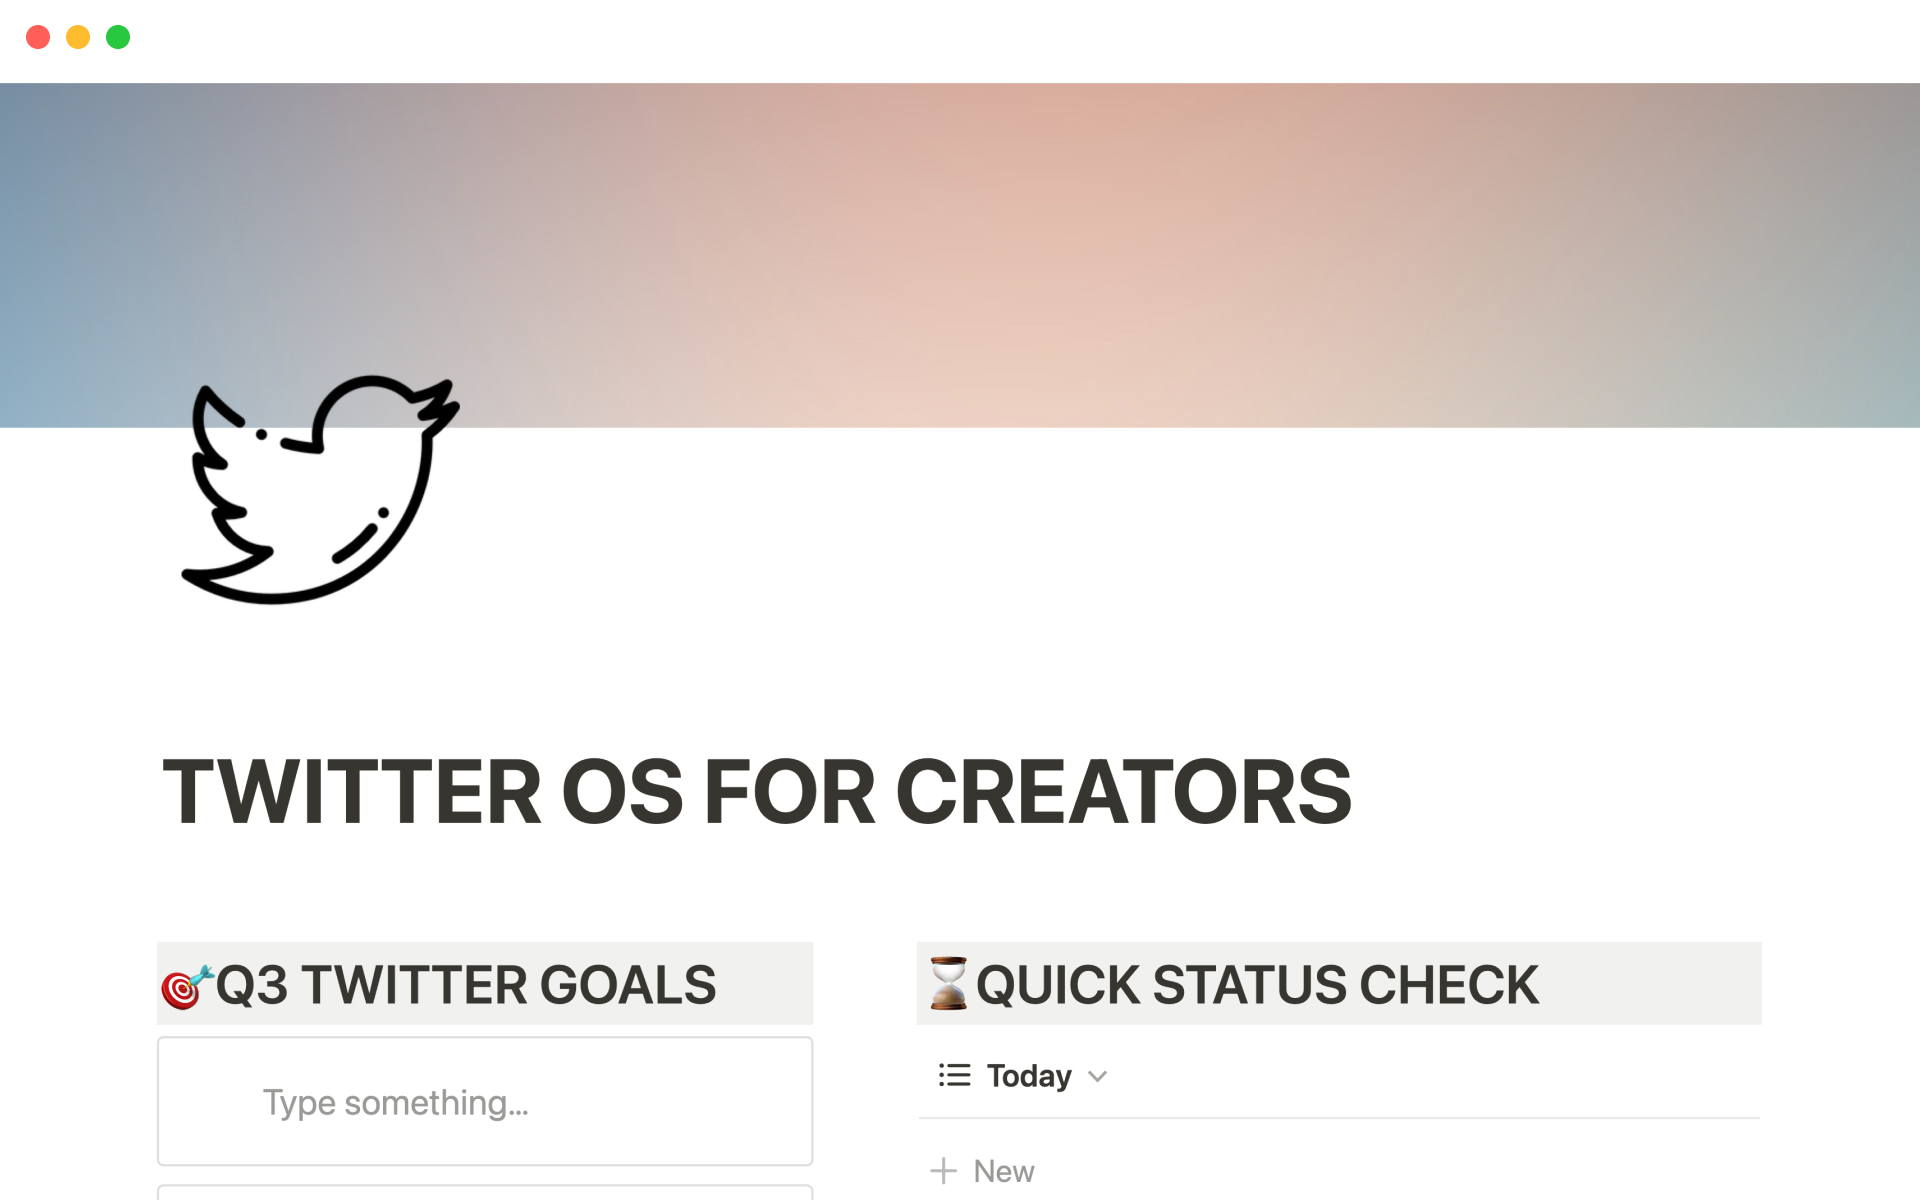 Creators can capture, curate and schedule tweets using this system.